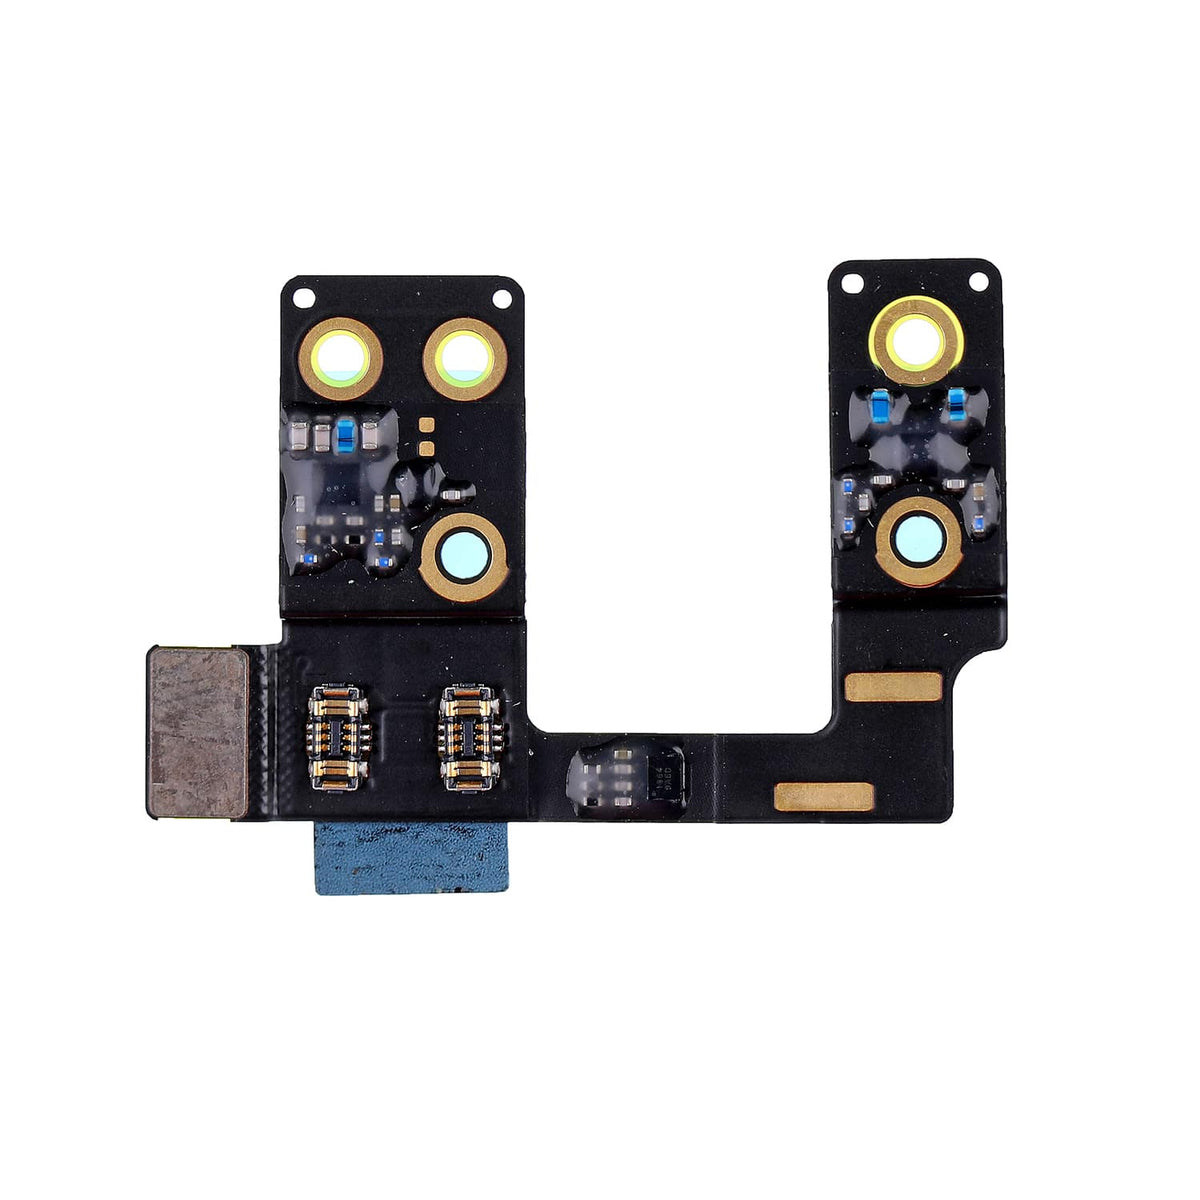 WIFI VERSION RIGHT ANTENNA FLEX CABLE FOR IPAD PRO 10.5" 1ST GEN